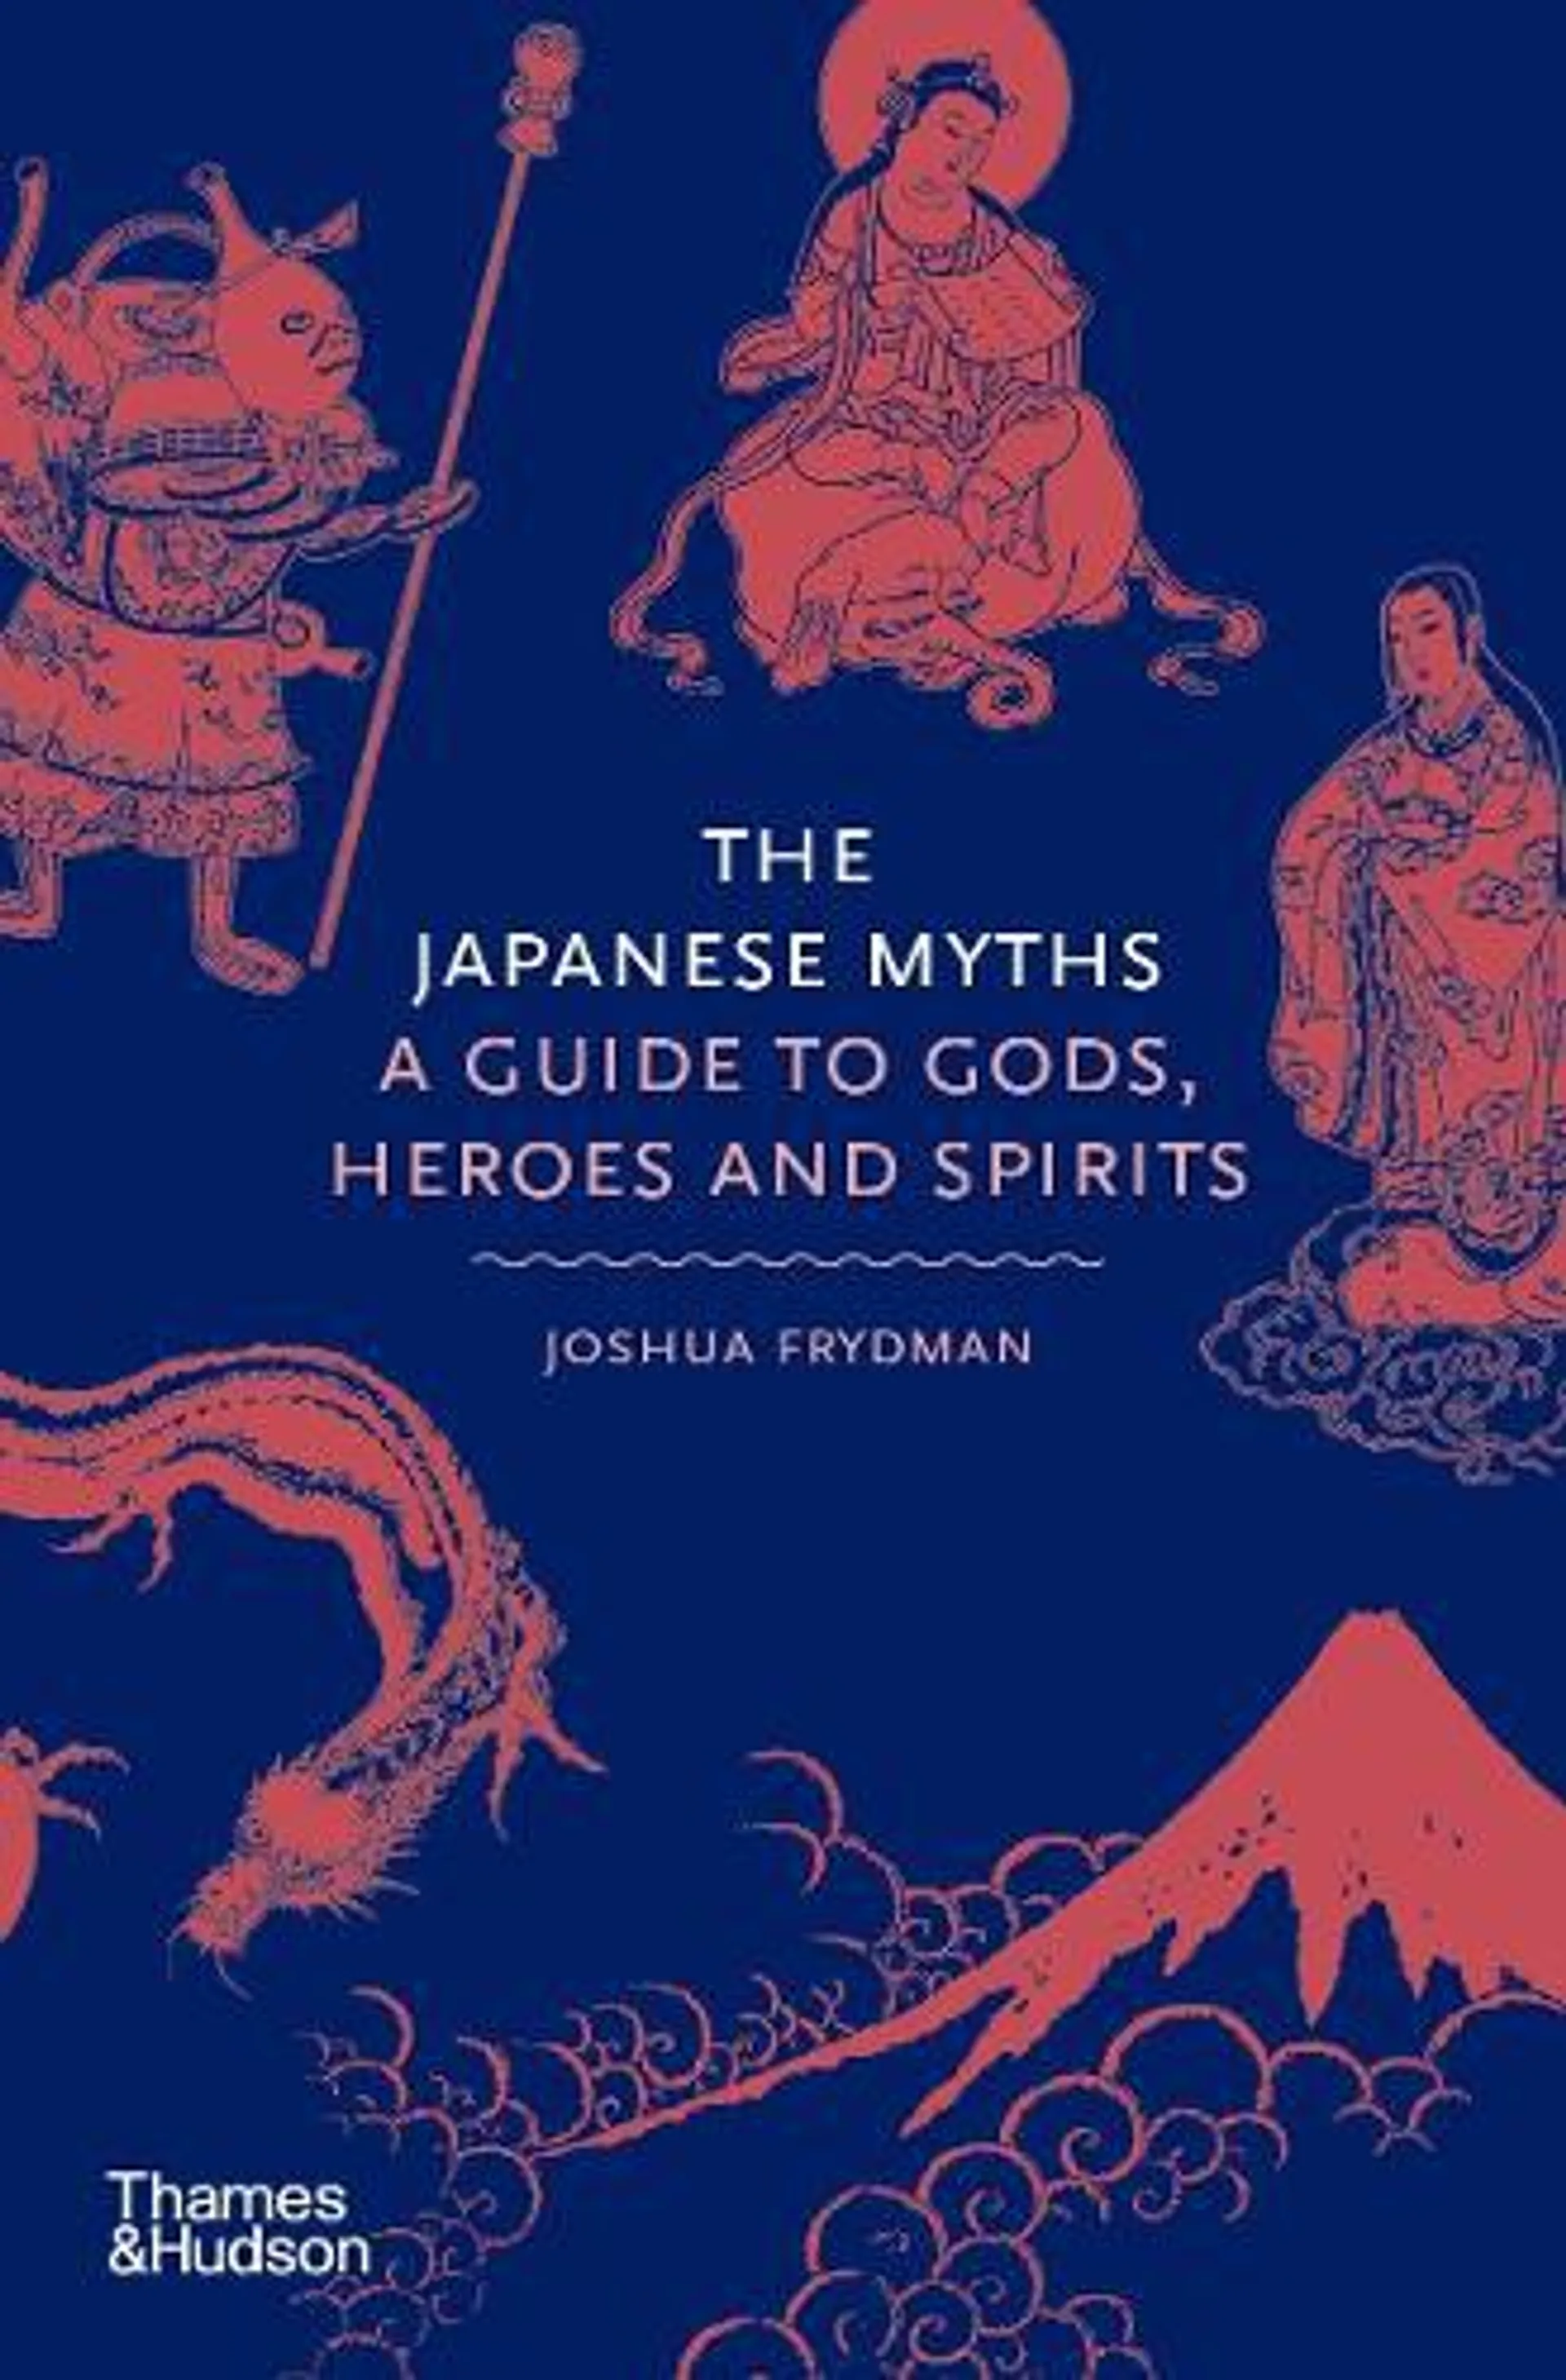 The Japanese Myths: A Guide to Gods, Heroes and Spirits (Hardback)